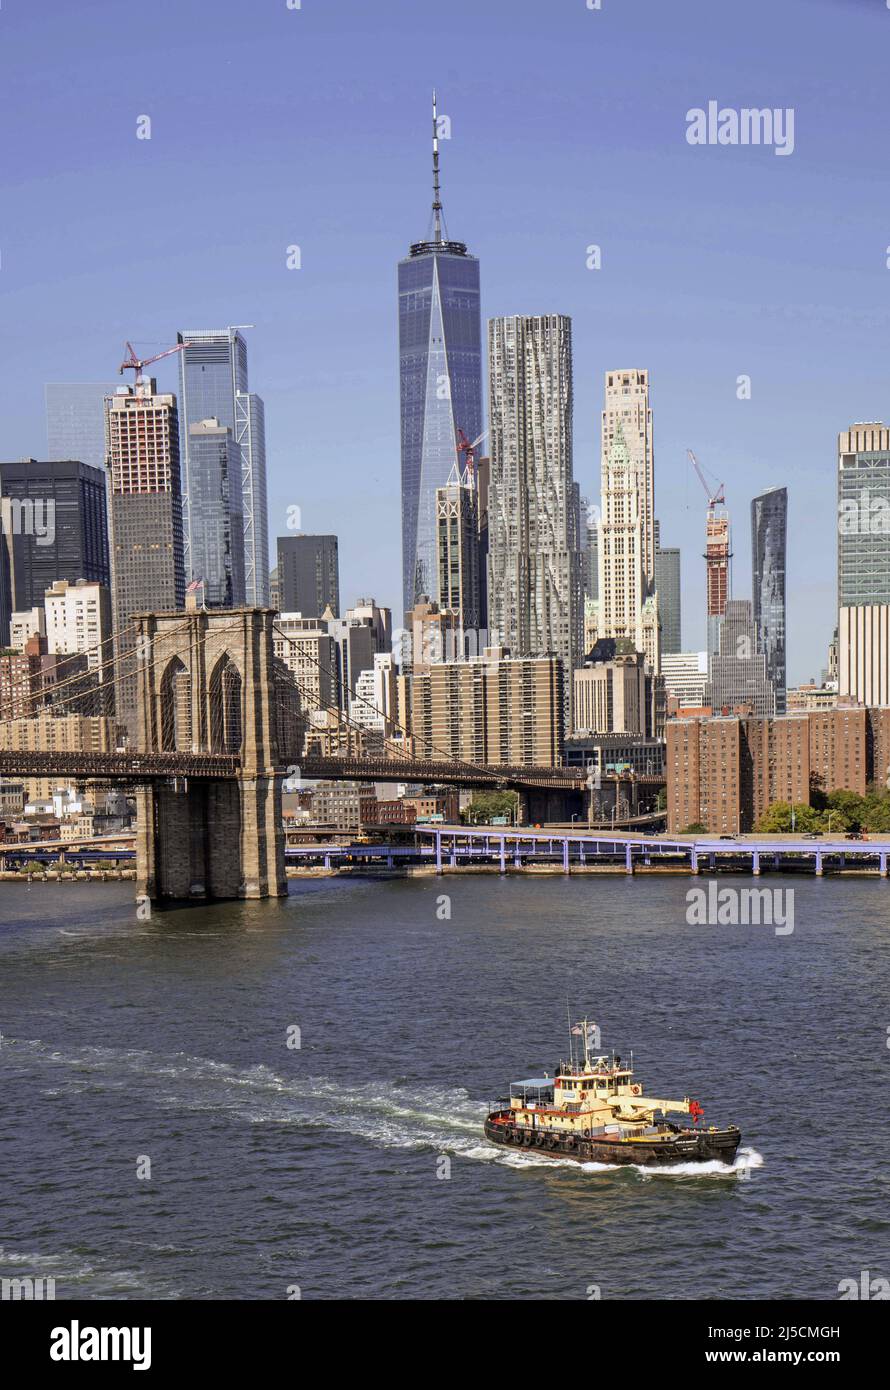 USA, New York, Sept. 19, 2019. the Brooklyn Bridge with the Manhattan skyline in New York on Sept. 19, 2019. in the background: the One World Trade Center. [automated translation] Stock Photo